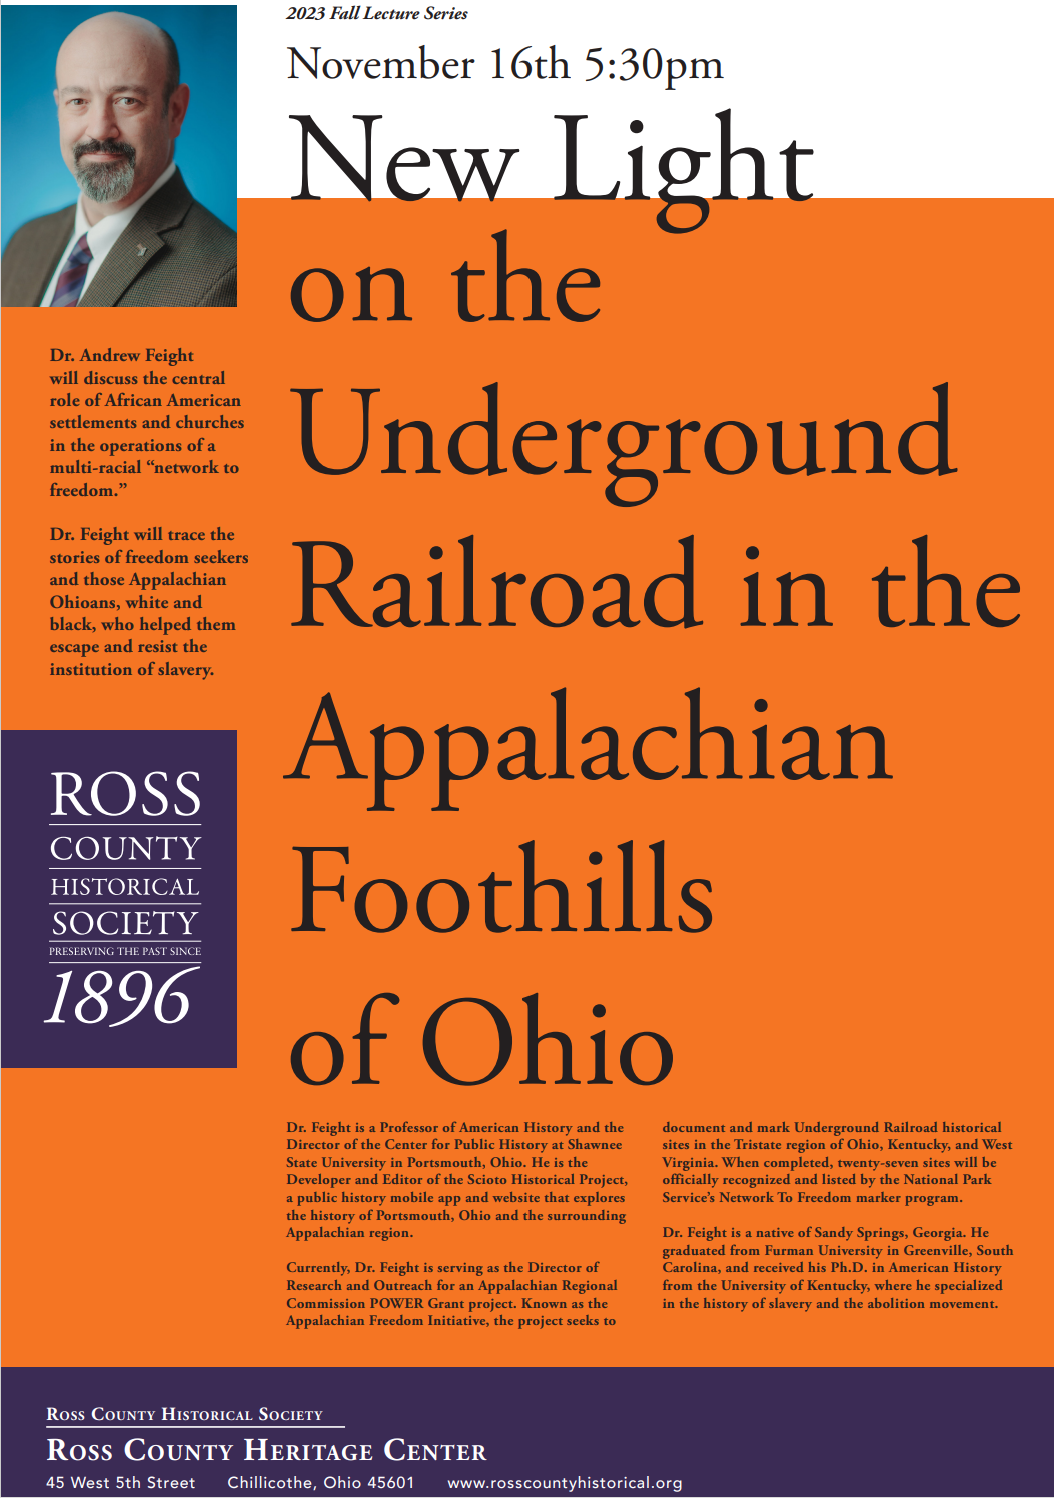 A flyer for a presentation about the Underground Railroad in Appalachia.